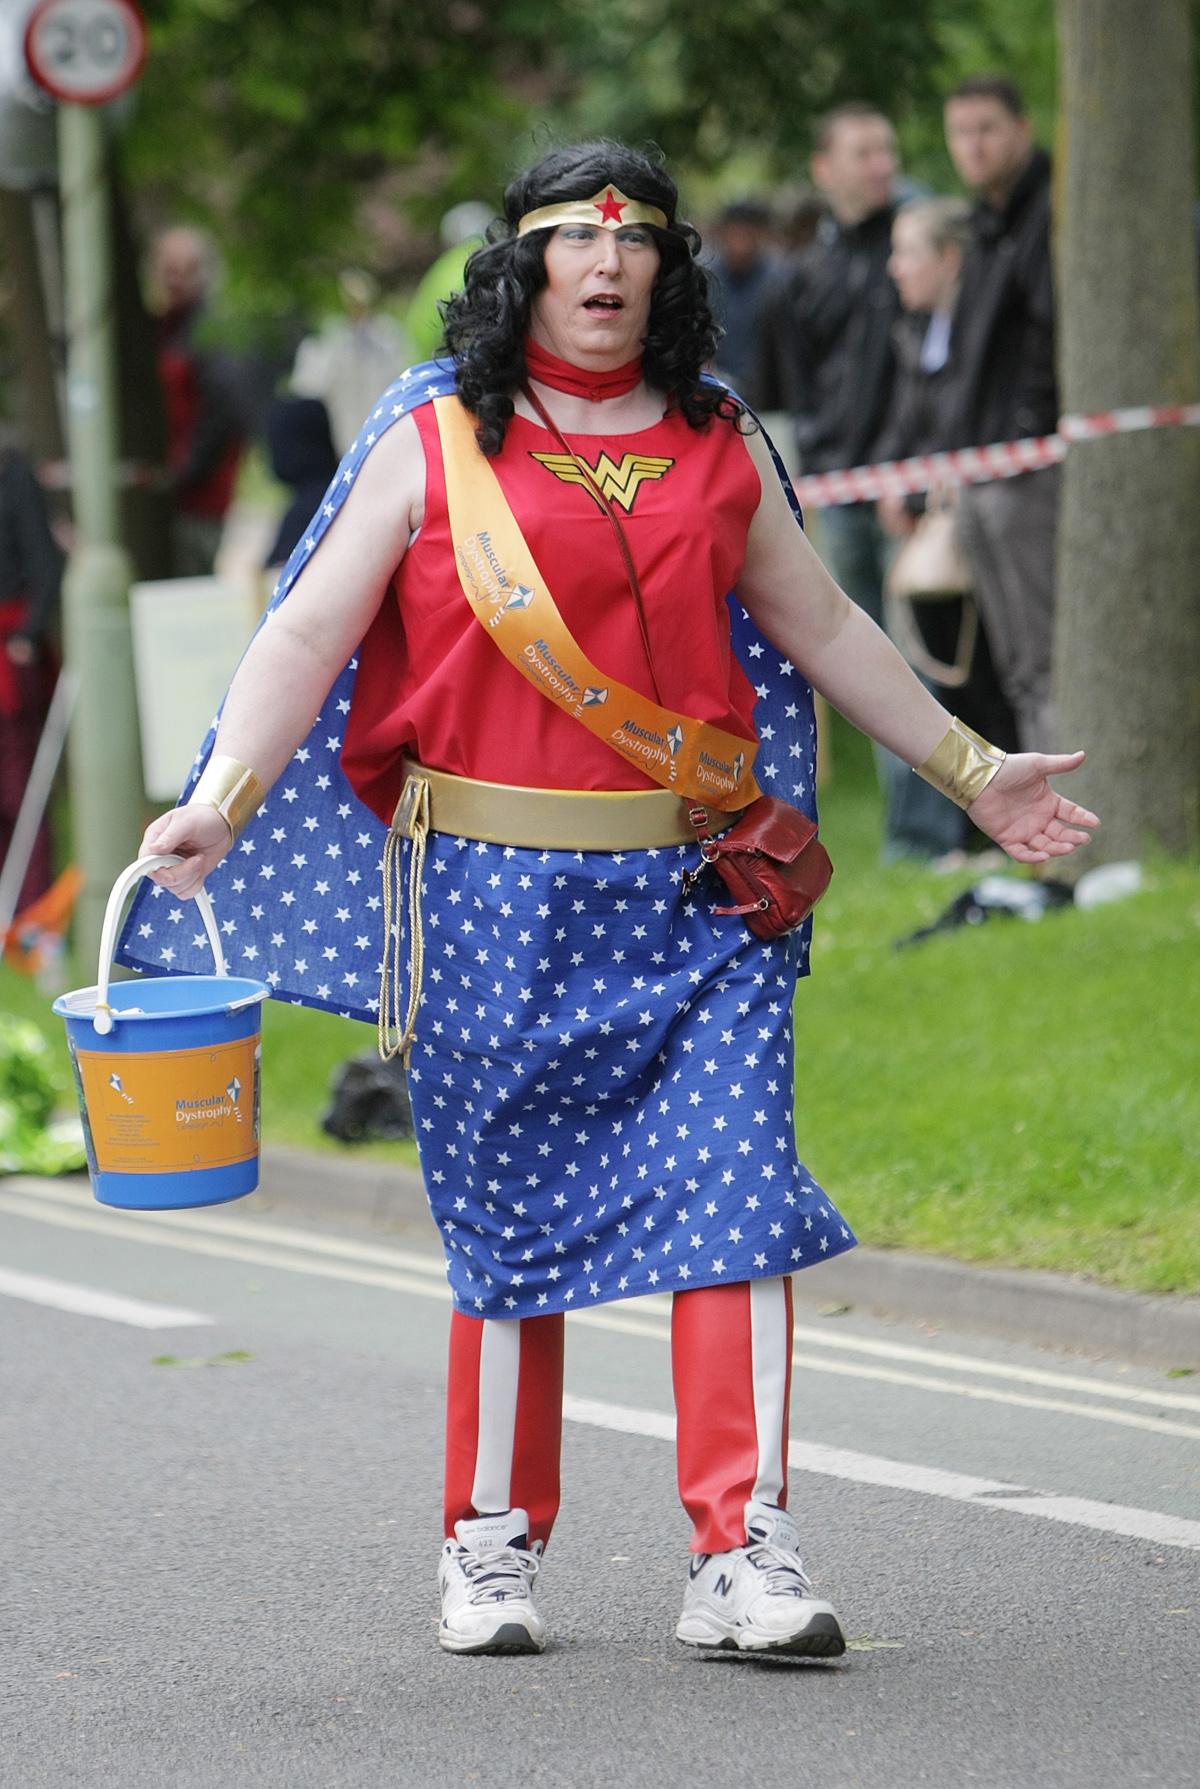 Pictures from the annual Oxford Town & Gown which took place on Sunday 11th May 2014